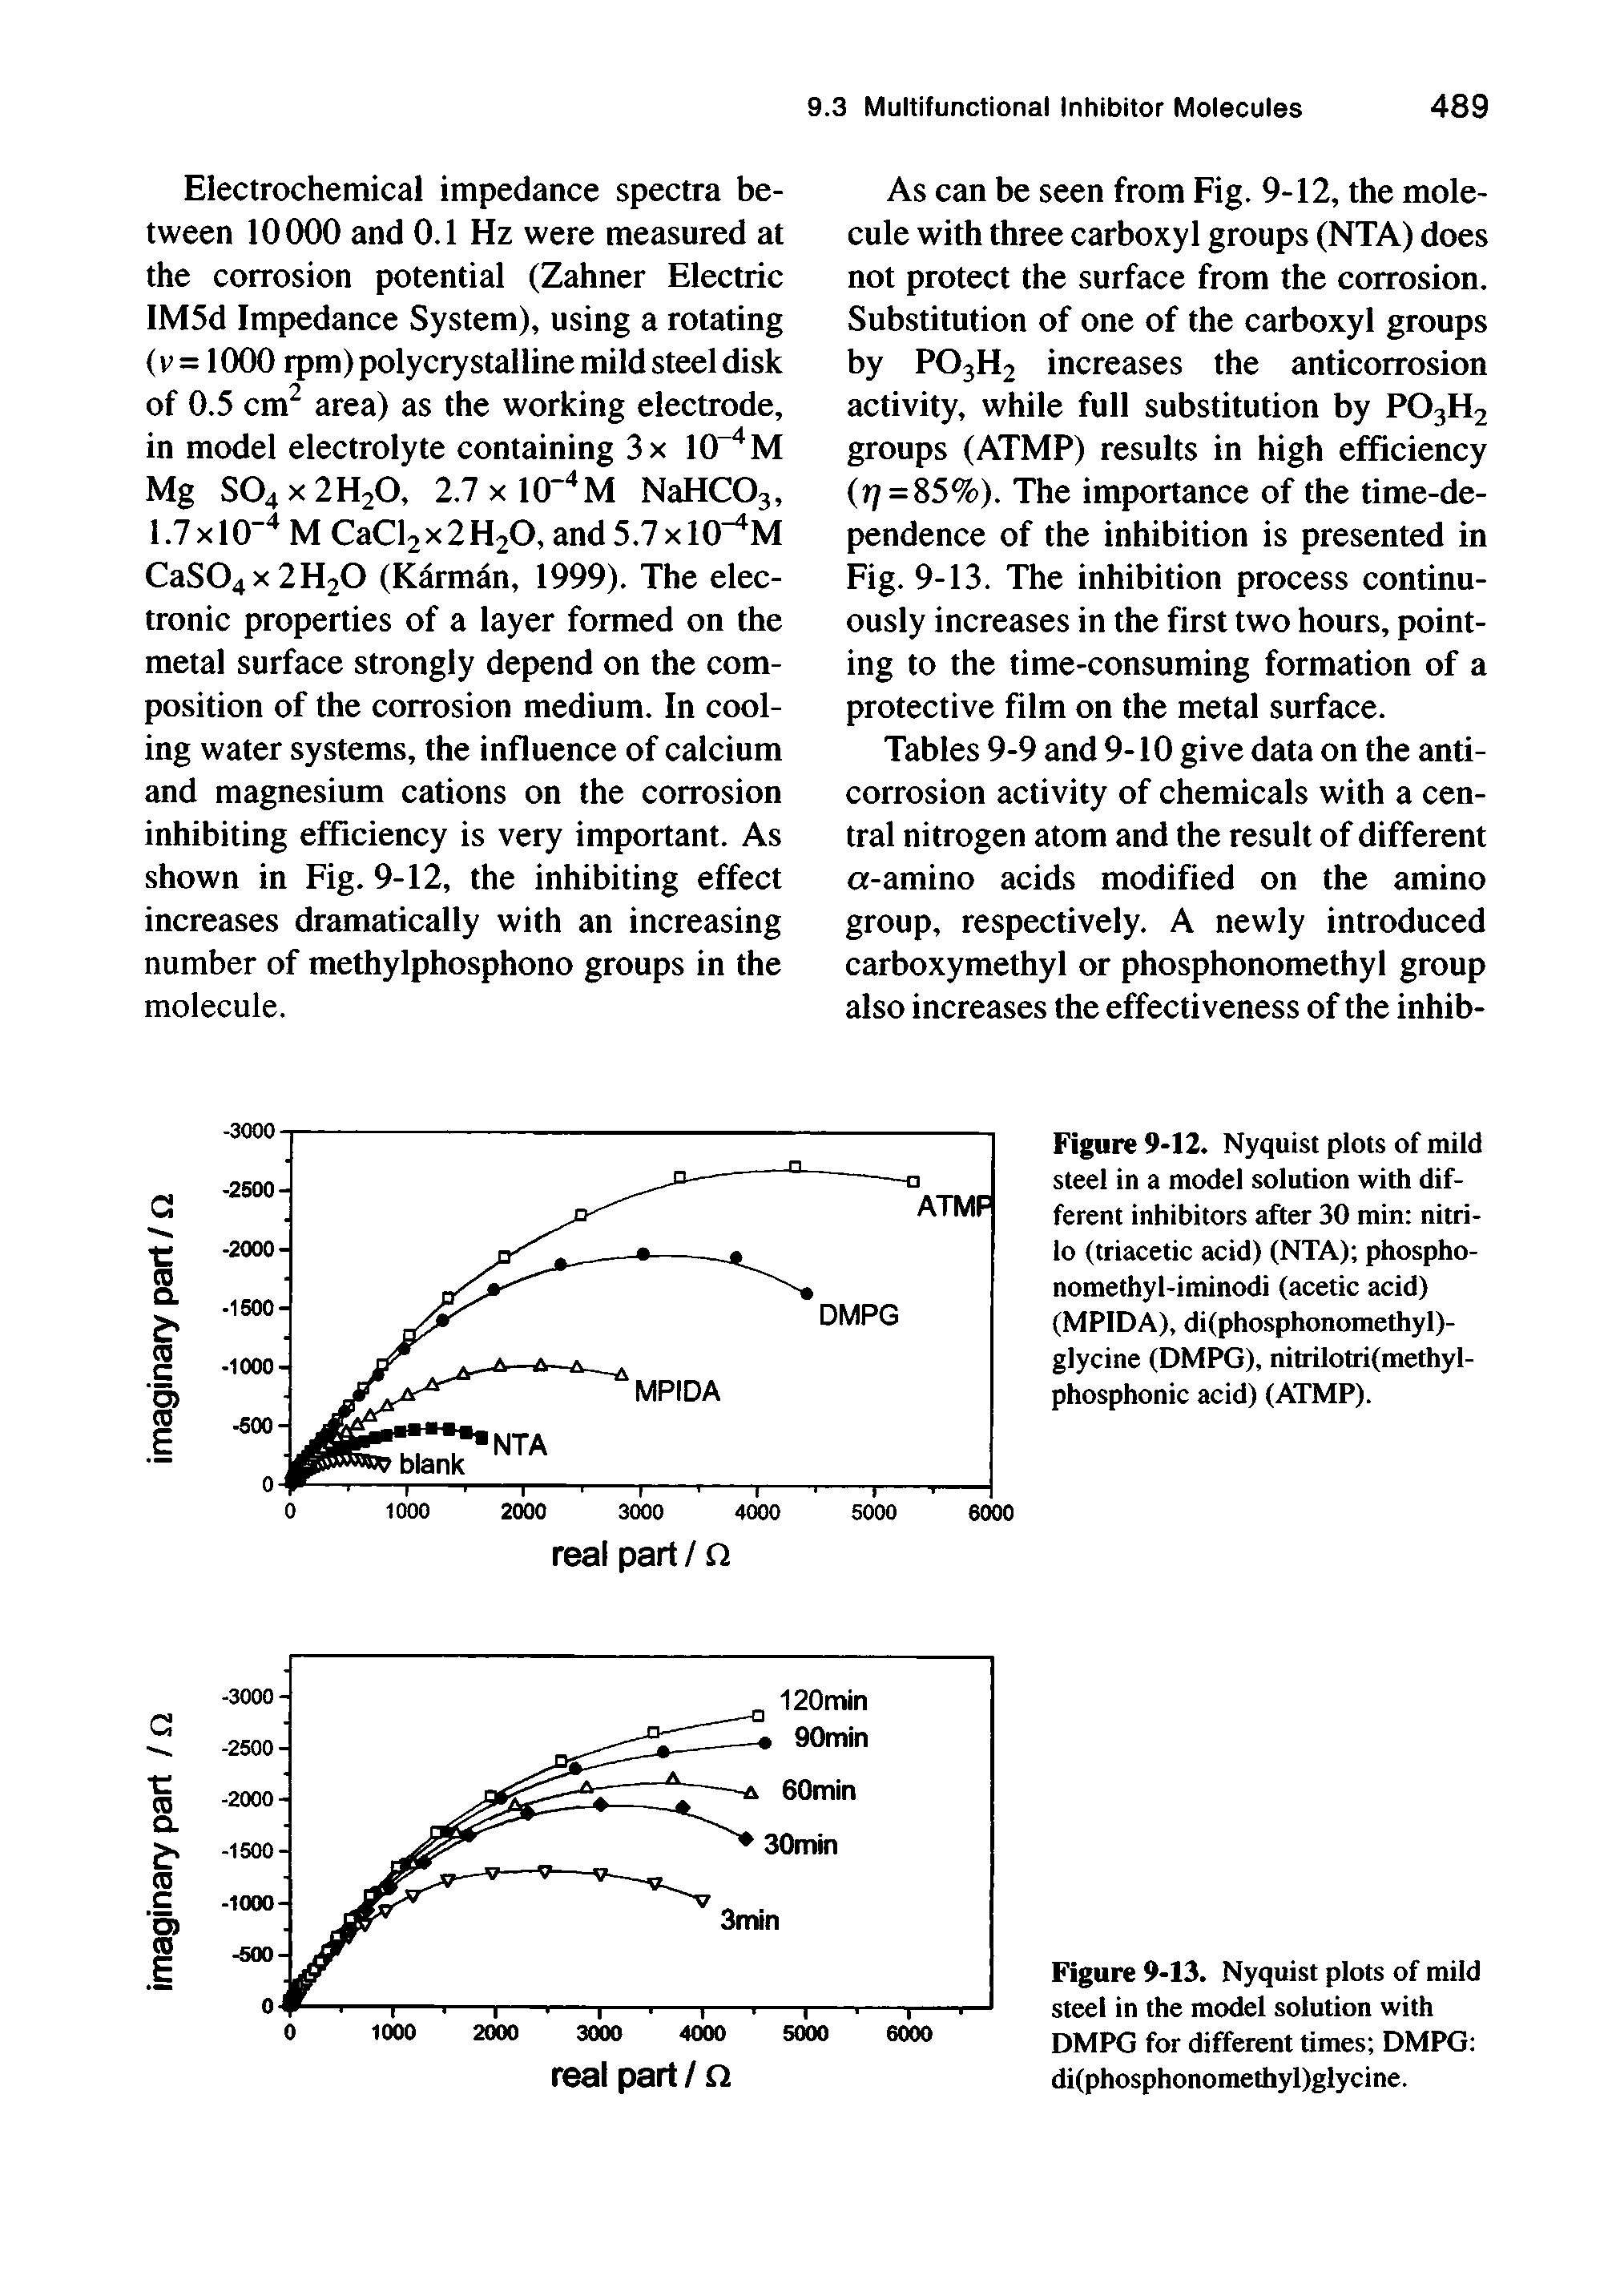 Figure 9-13. Nyquist plots of mild steel in the model solution with DMPG for different times DMPG di(phosphonomethyl)glycine.